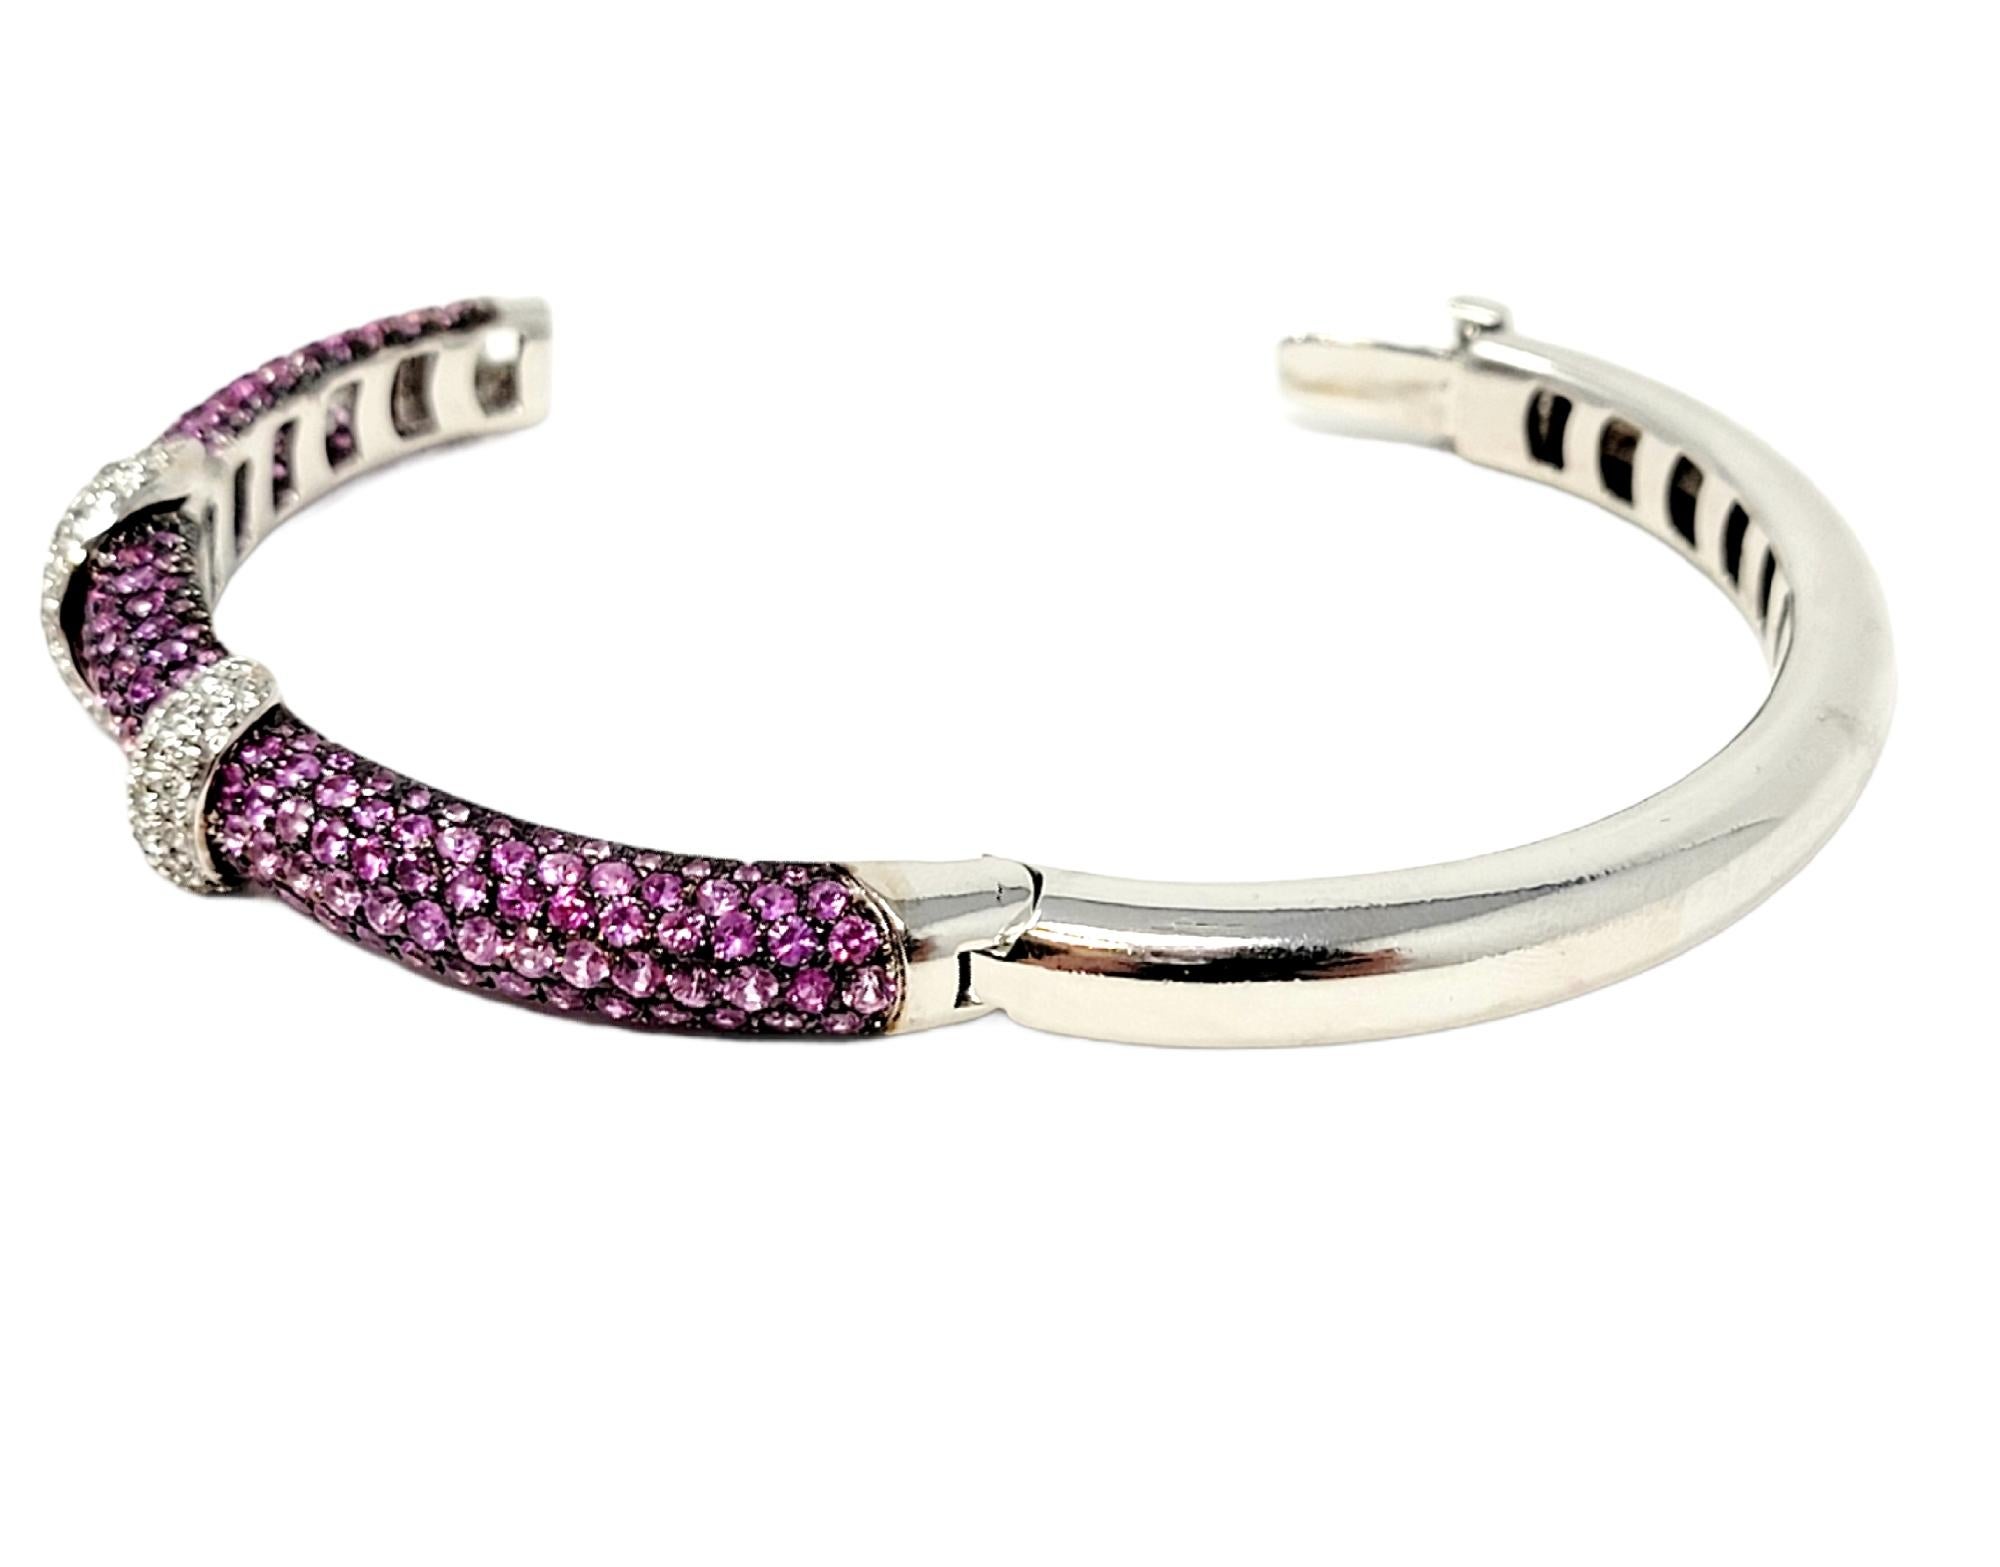 Andreoli Pink Sapphire and Diamond Wrap Hinged Bangle Bracelet Cuff For Sale 4